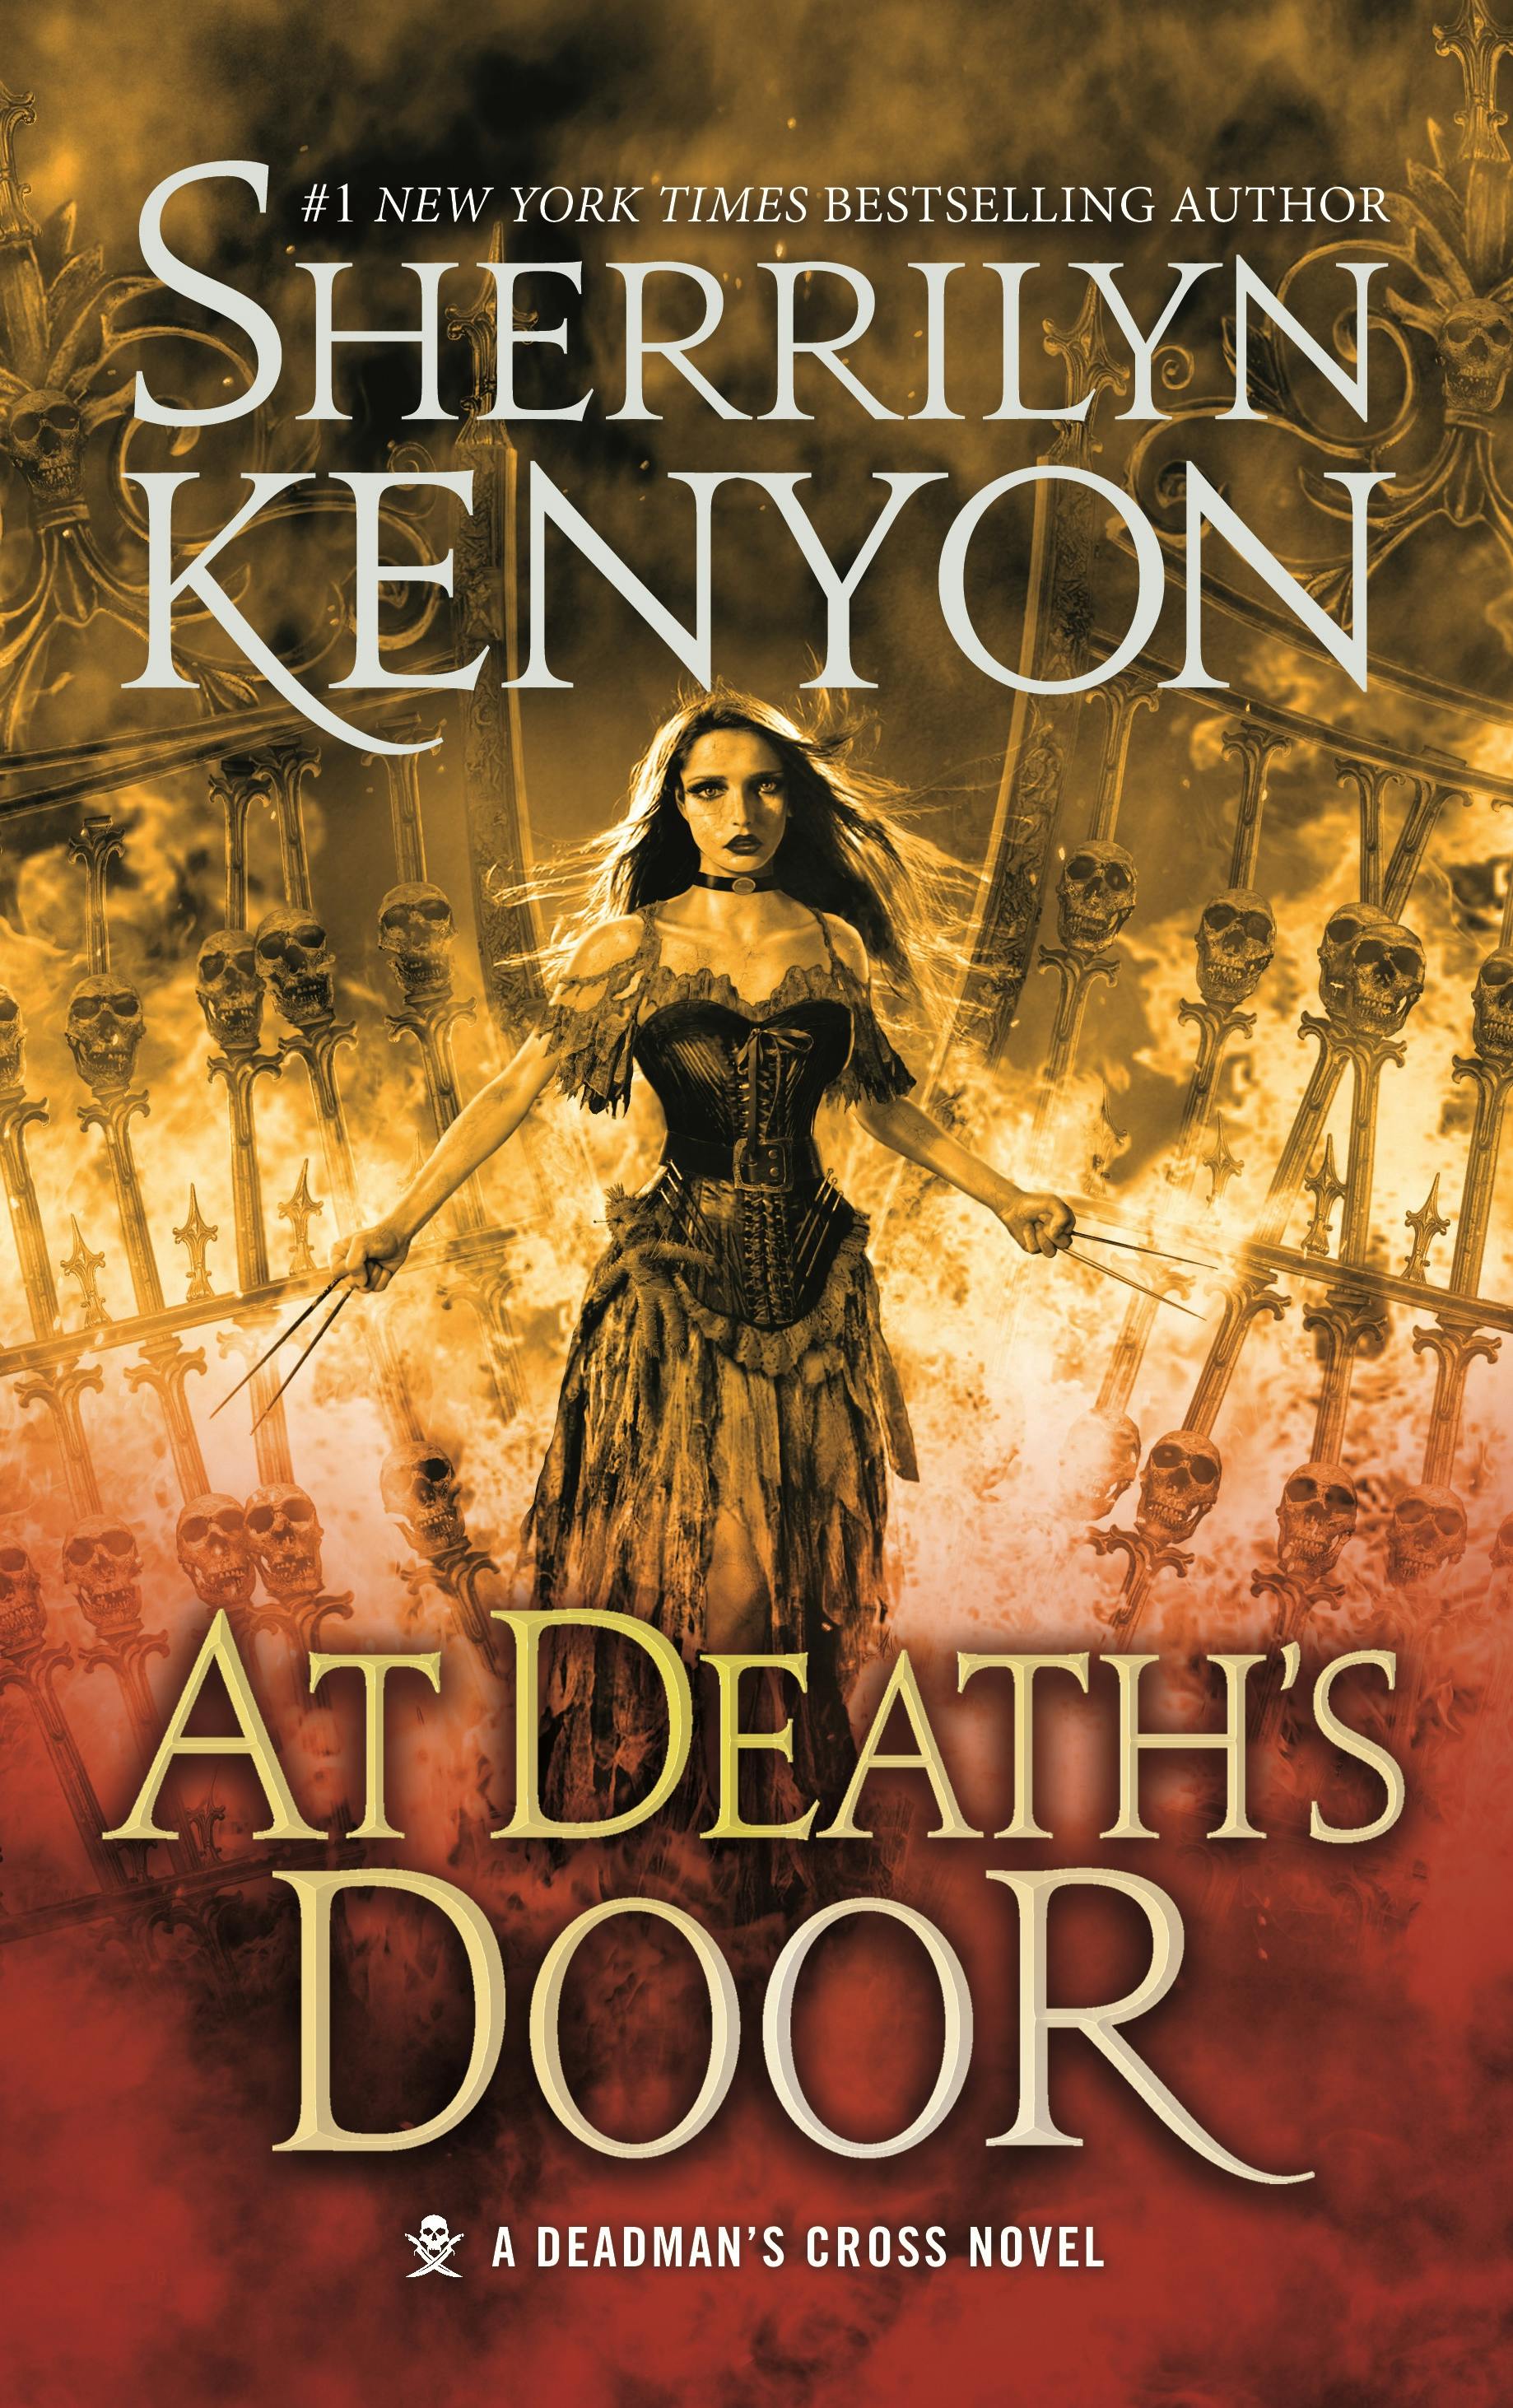 Cover for the book titled as: At Death's Door